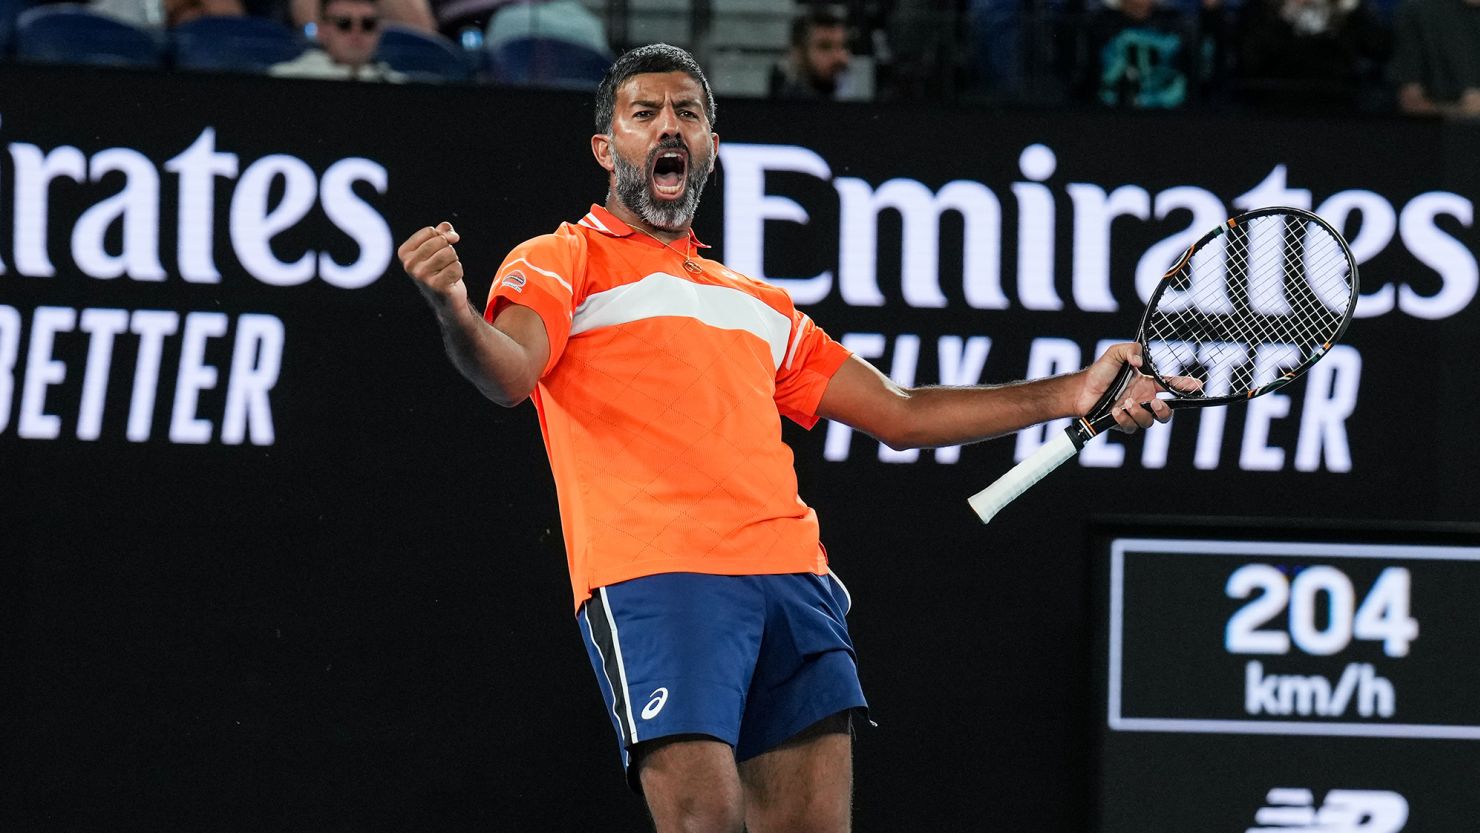 MELBOURNE, AUSTRALIA - JANUARY 25: Rohan Bopanna of India celebrates the victory in the Men's Doubles Semi Final match against Tomas Machac of Czech Republic and Zhizhen Zhang of China during day twelve of the 2024 Australian Open at Melbourne Park on January 25, 2024 in Melbourne, Australia. (Photo by Shi Tang/Getty Images)